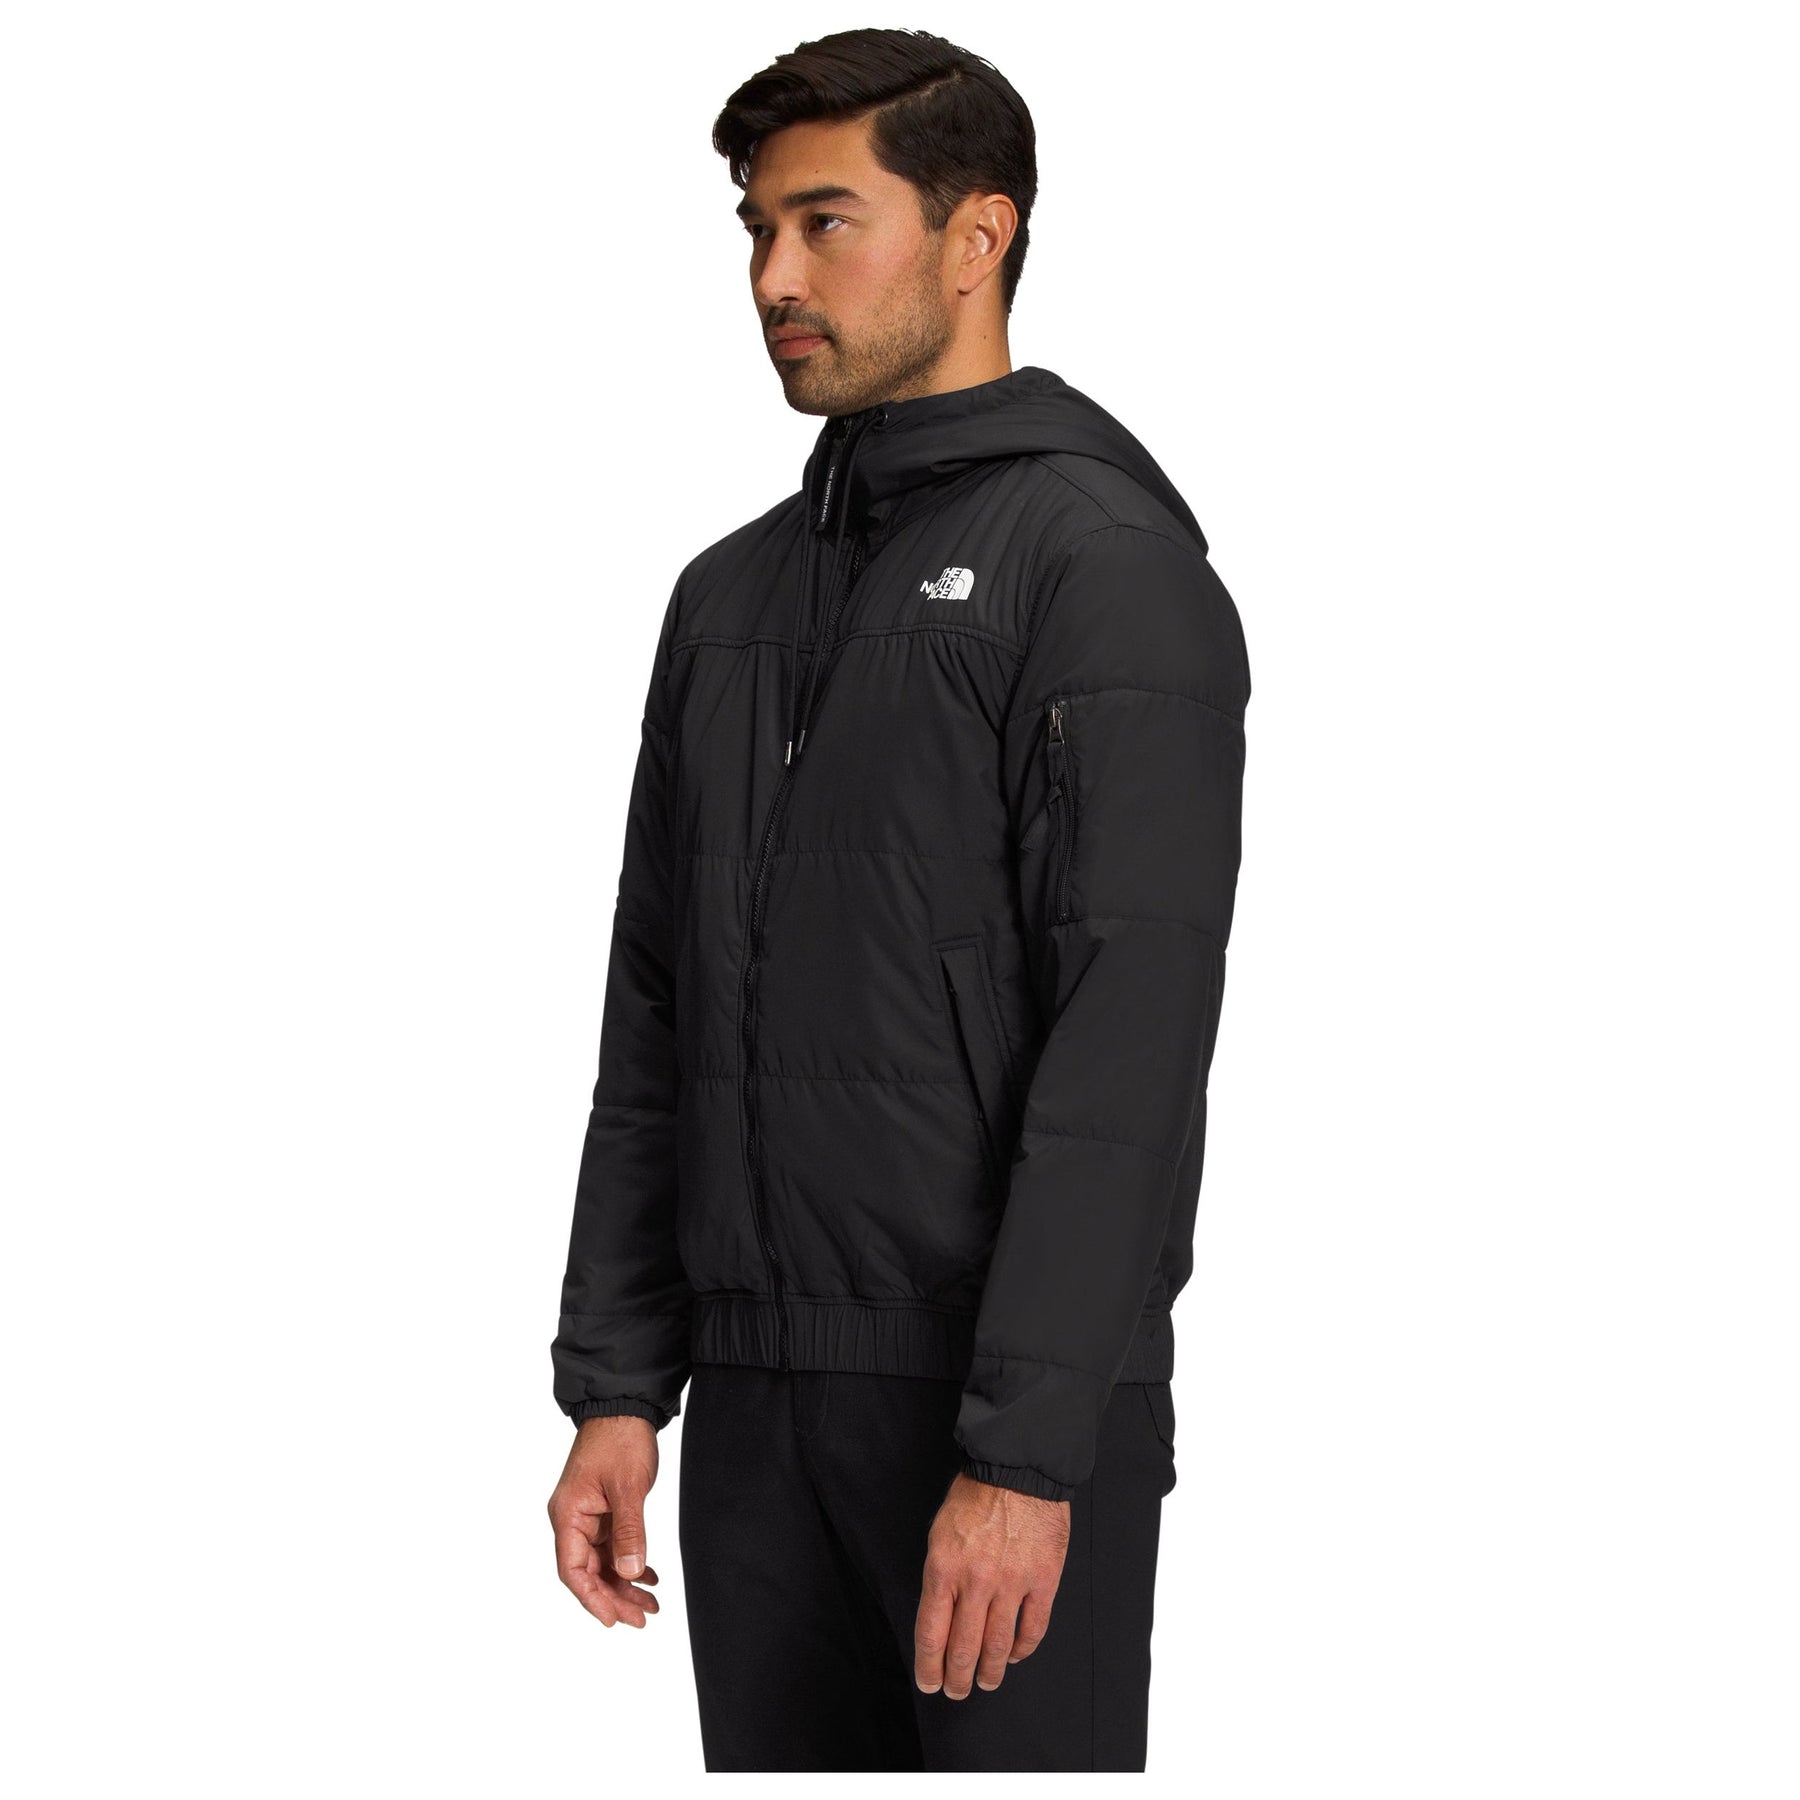 The North Face Men's Highrail Bomber Jacket in Black | Footprint USA